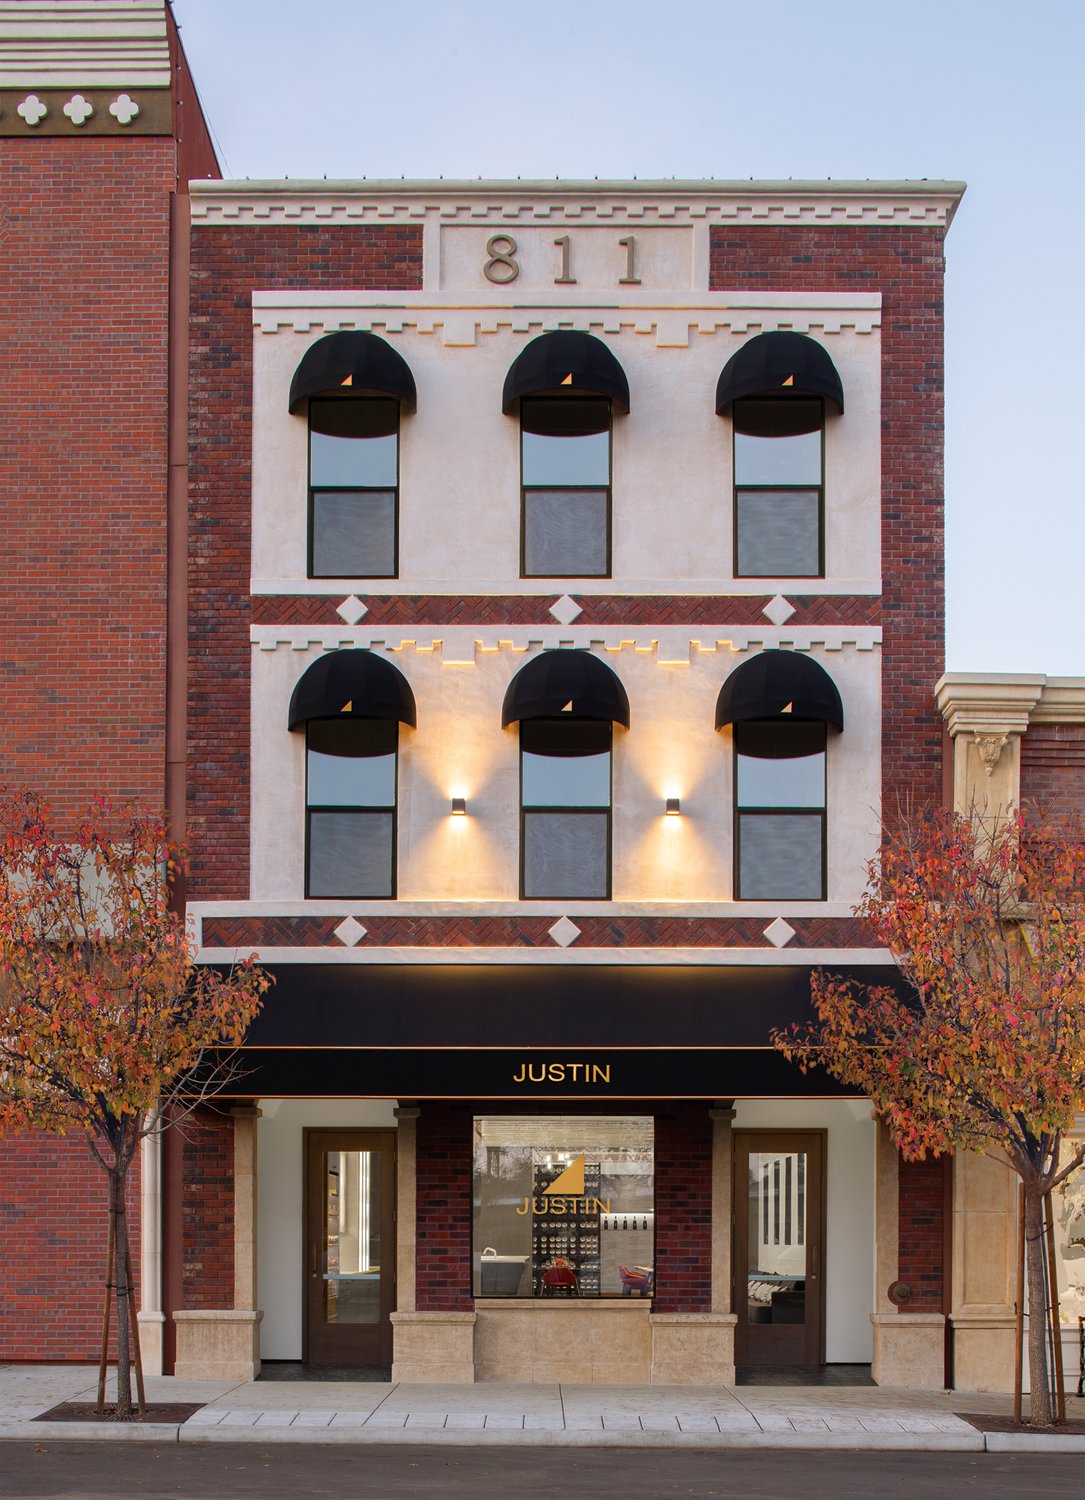 A narrow, three story, brick building with black domed awnings, the JUSTIN logo in gold on the largest window.